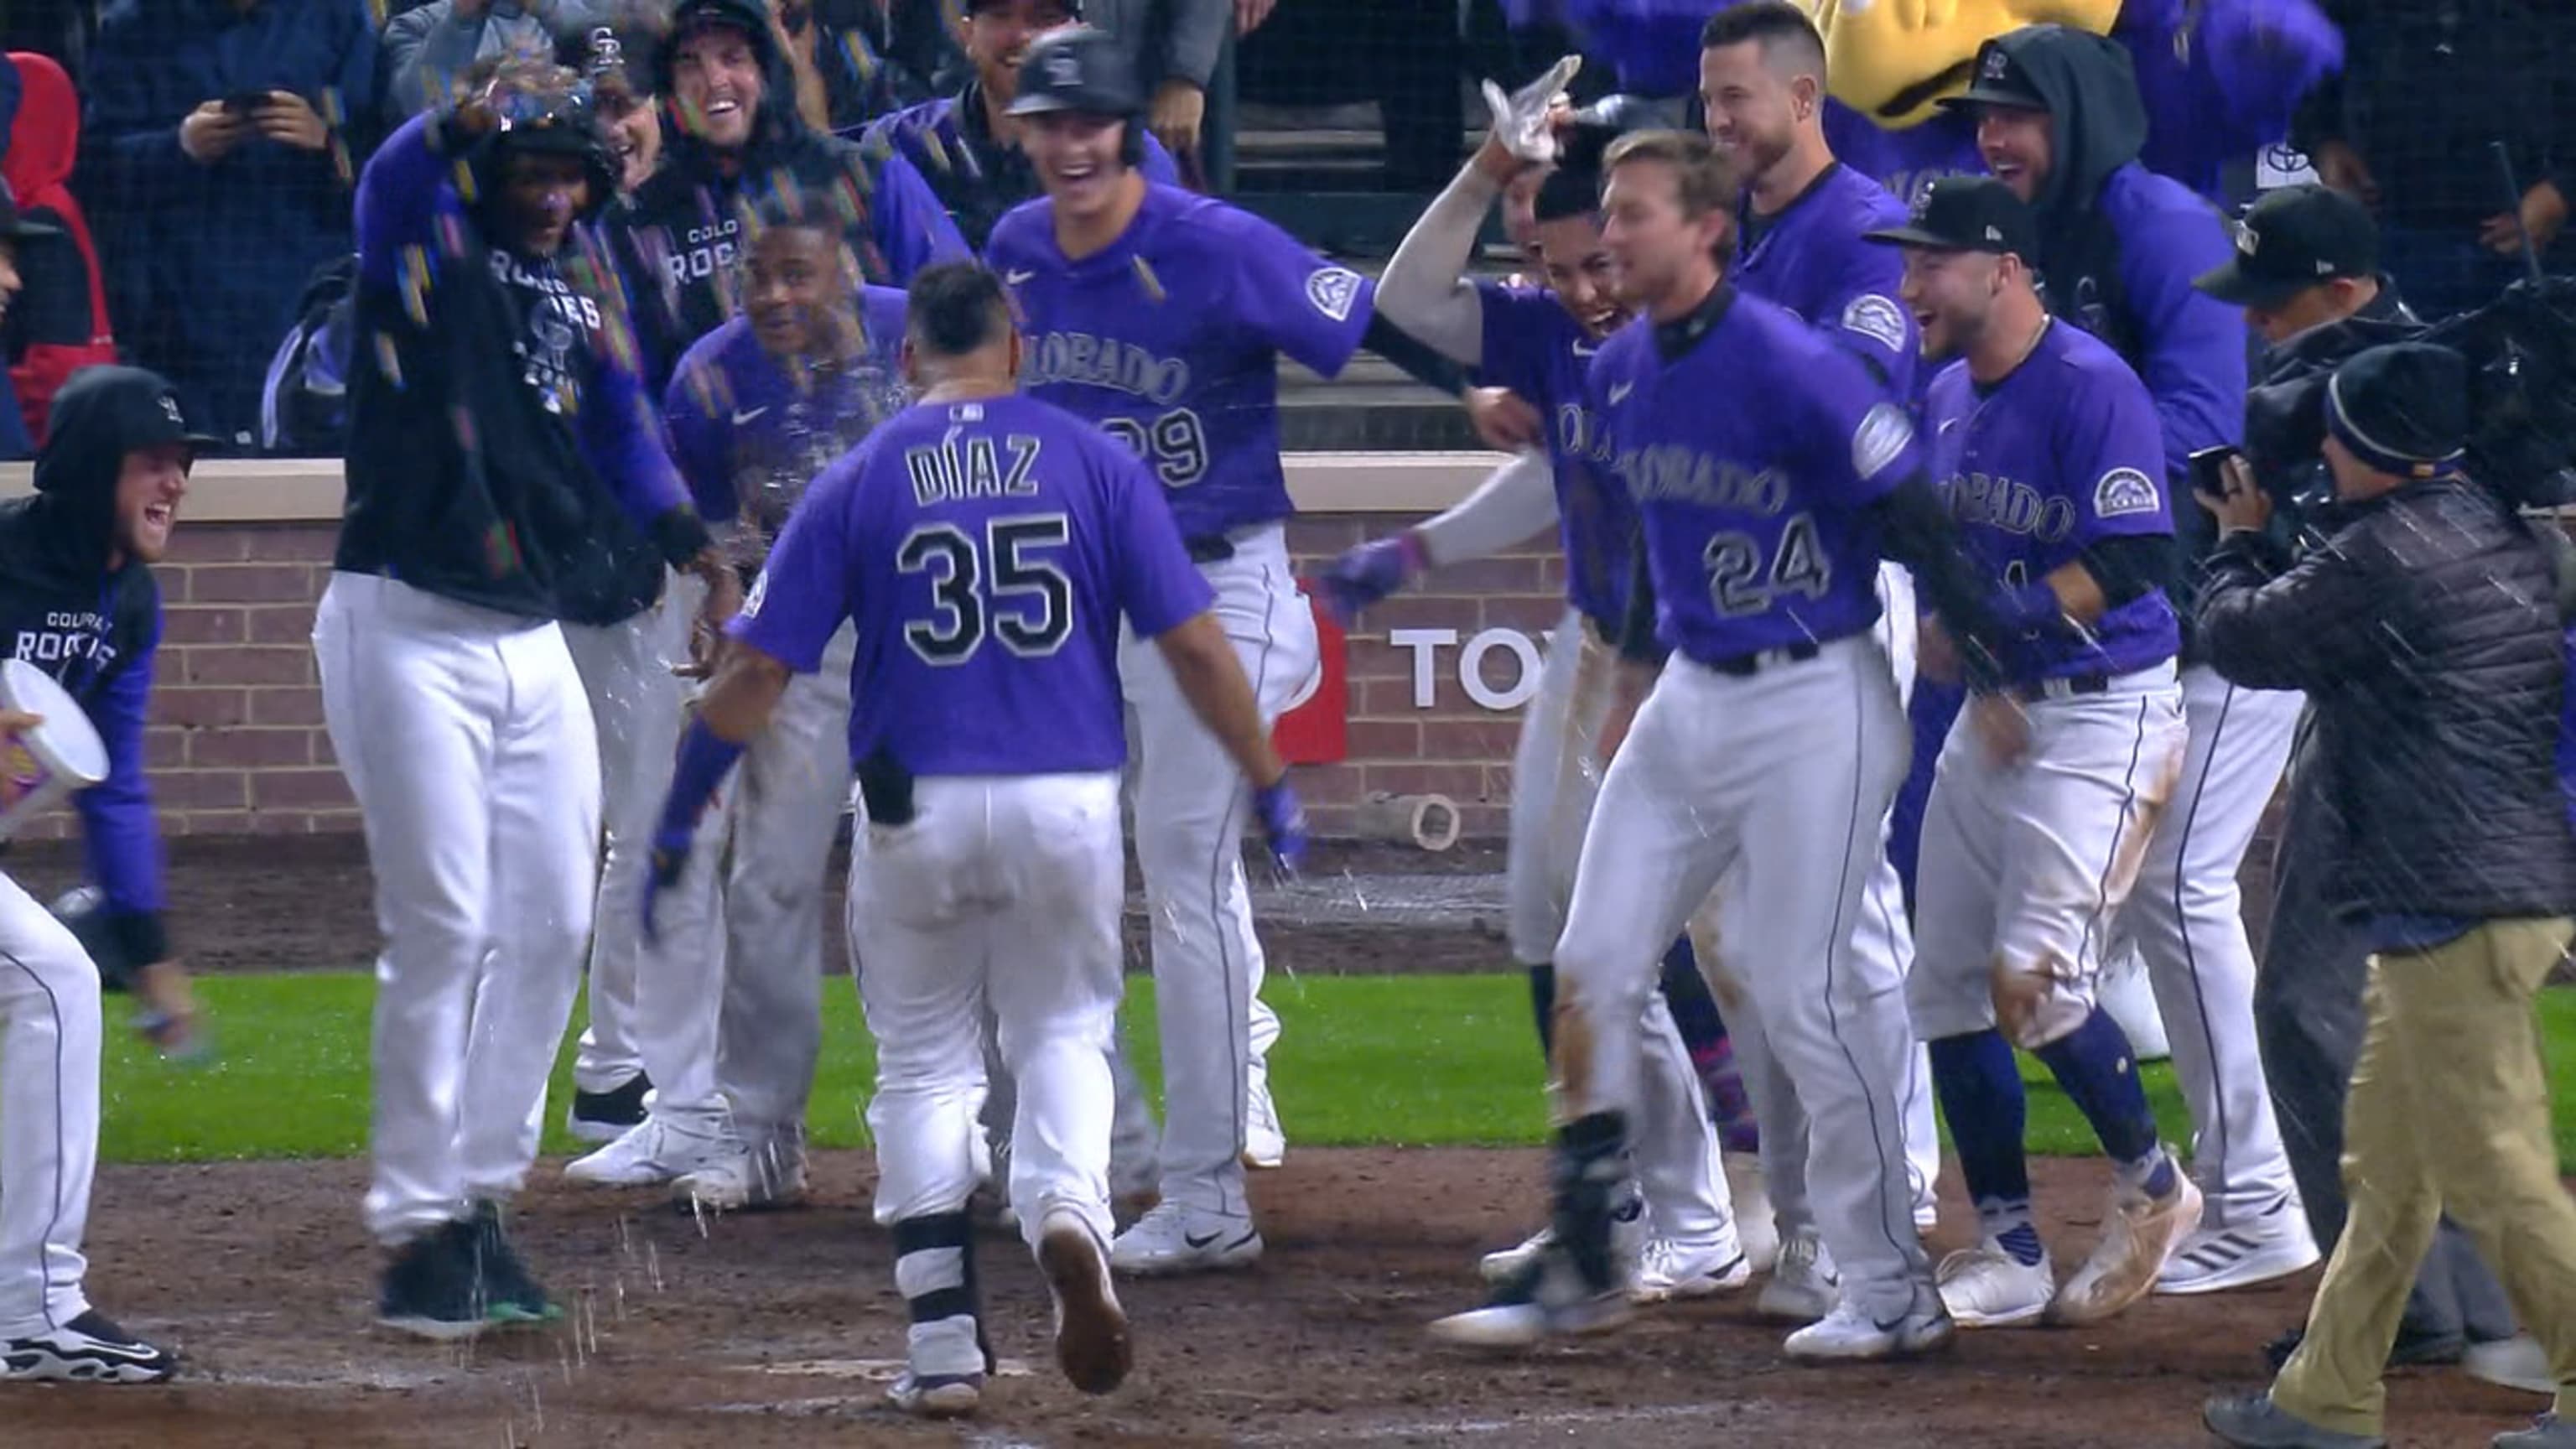 Story hits 3-run homer in 7th, Rockies hold off Cards